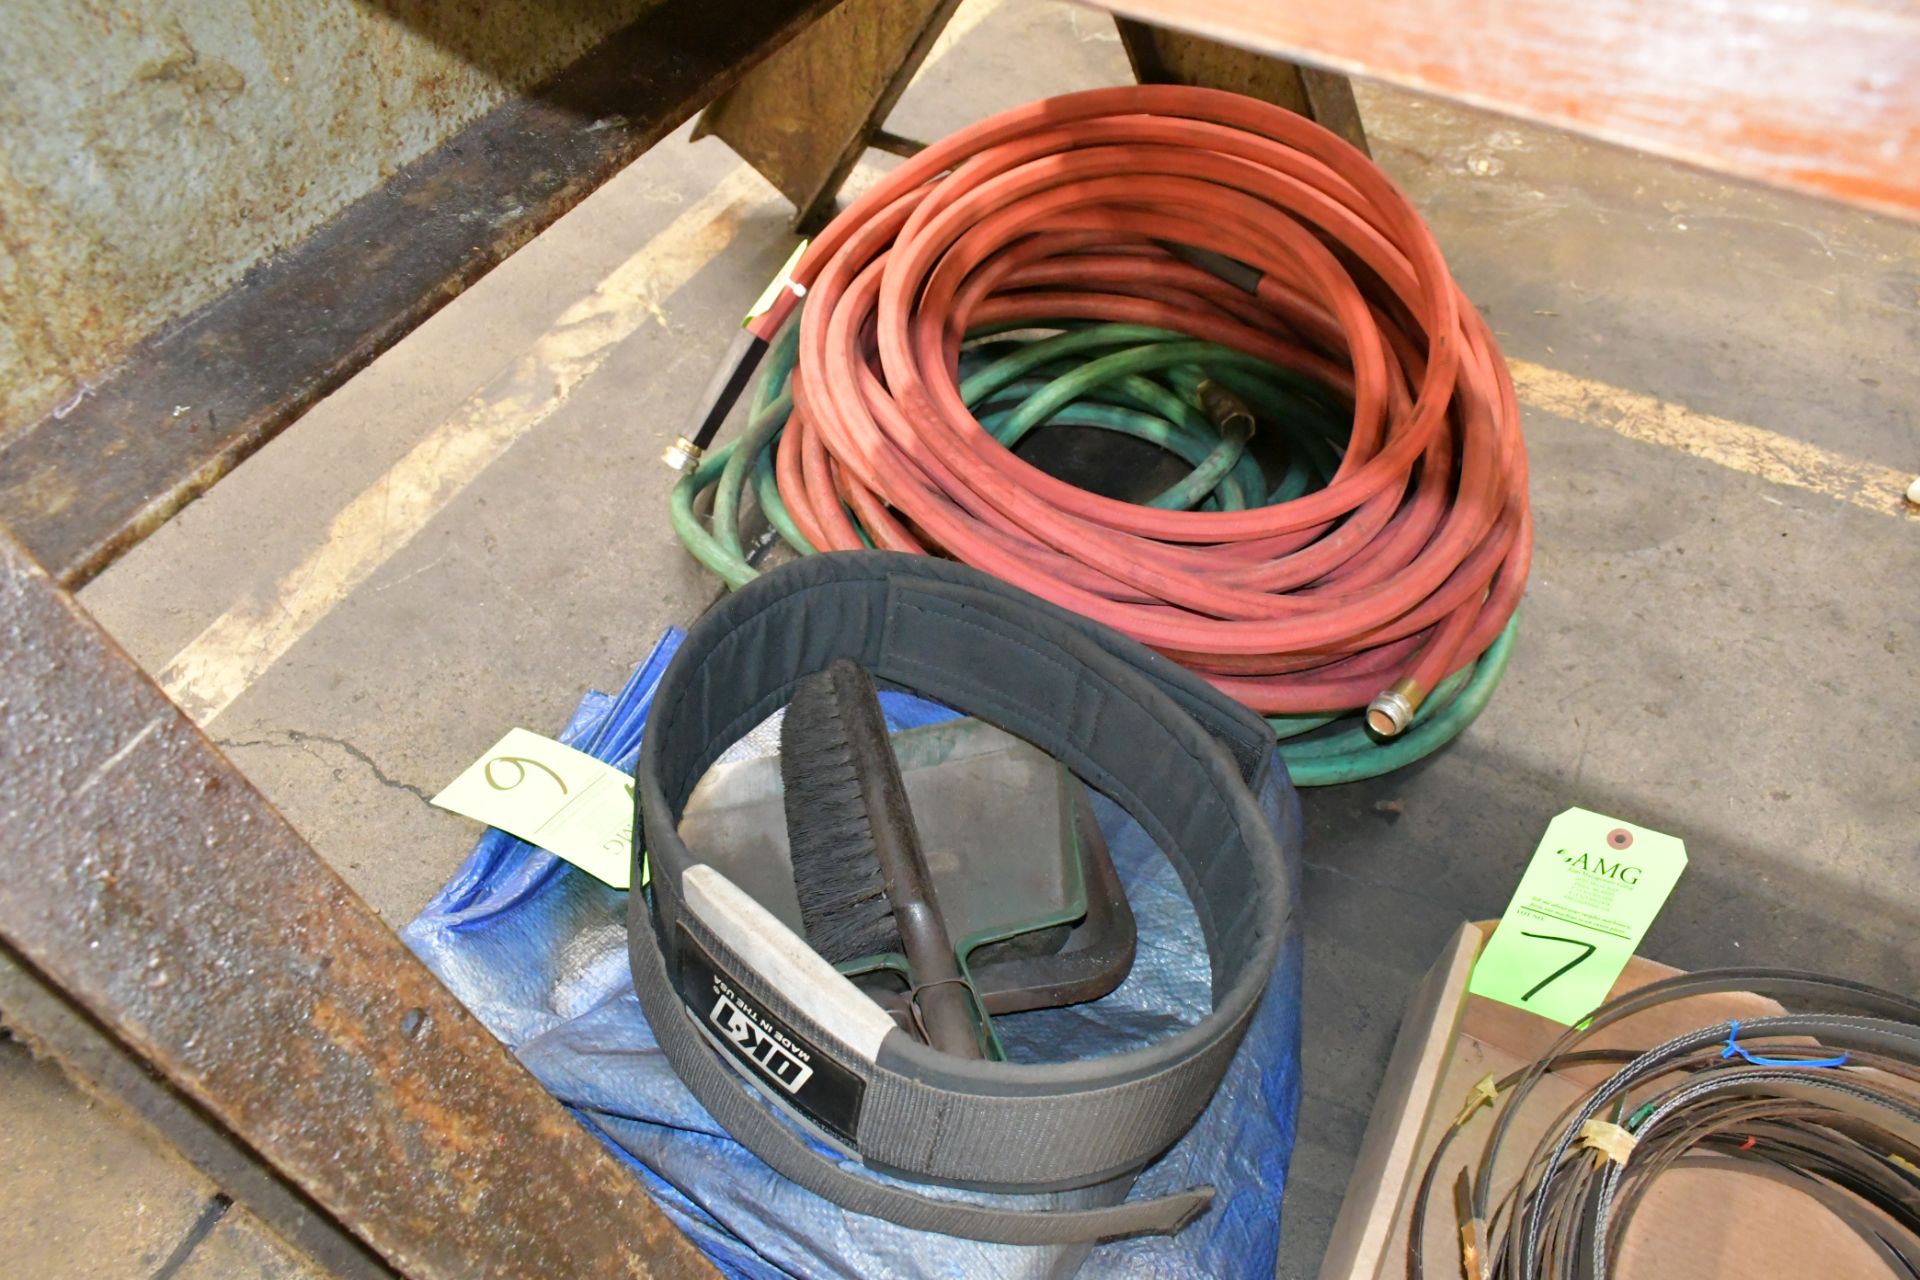 Lot-Tarps, Hoses, and Strap on Floor Under (1) Bench